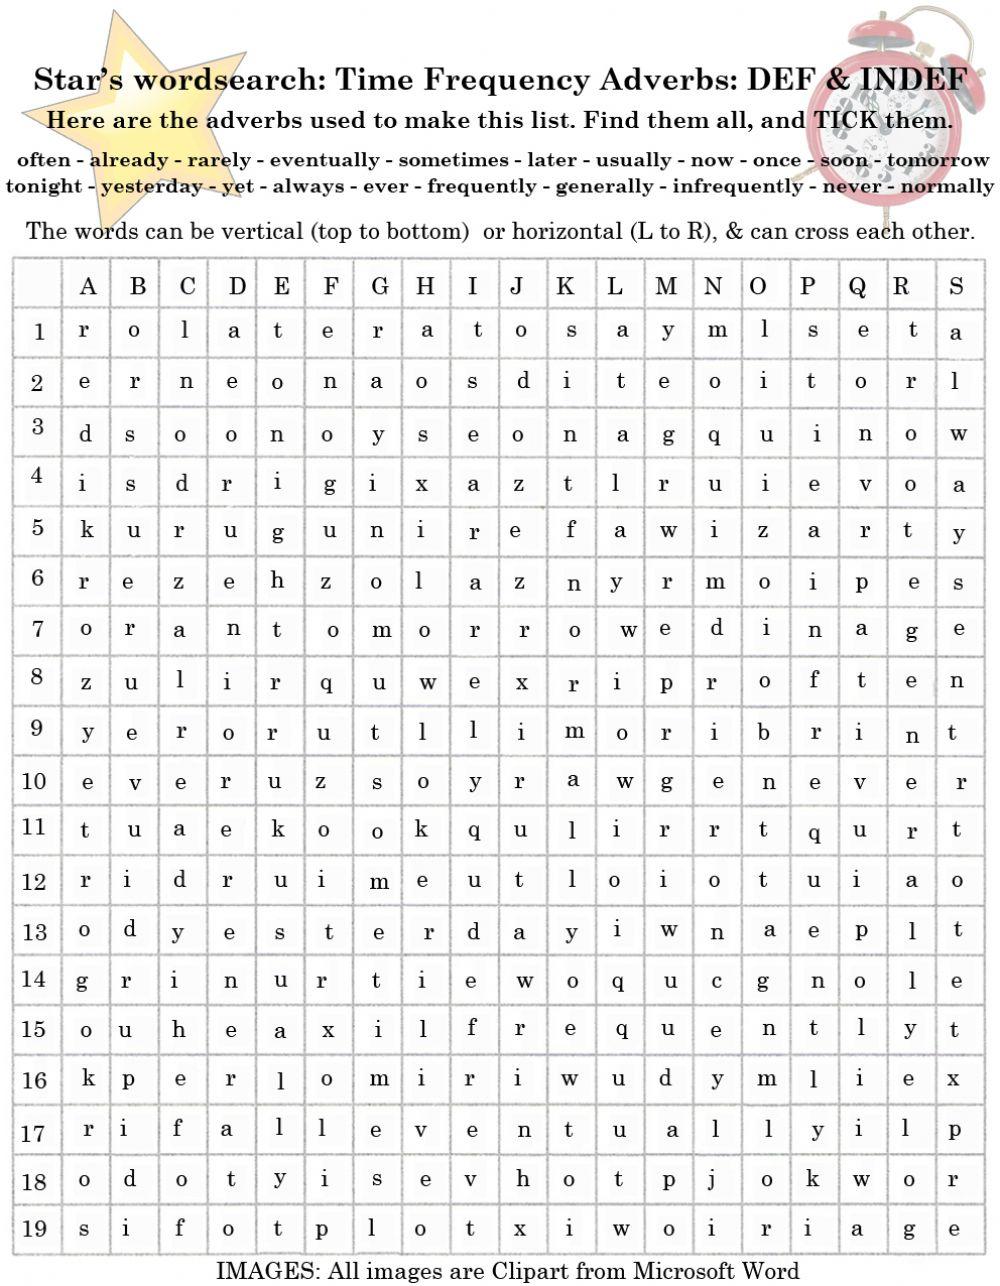 Smt-adverbs-time frequency-def-indef-wordsearch